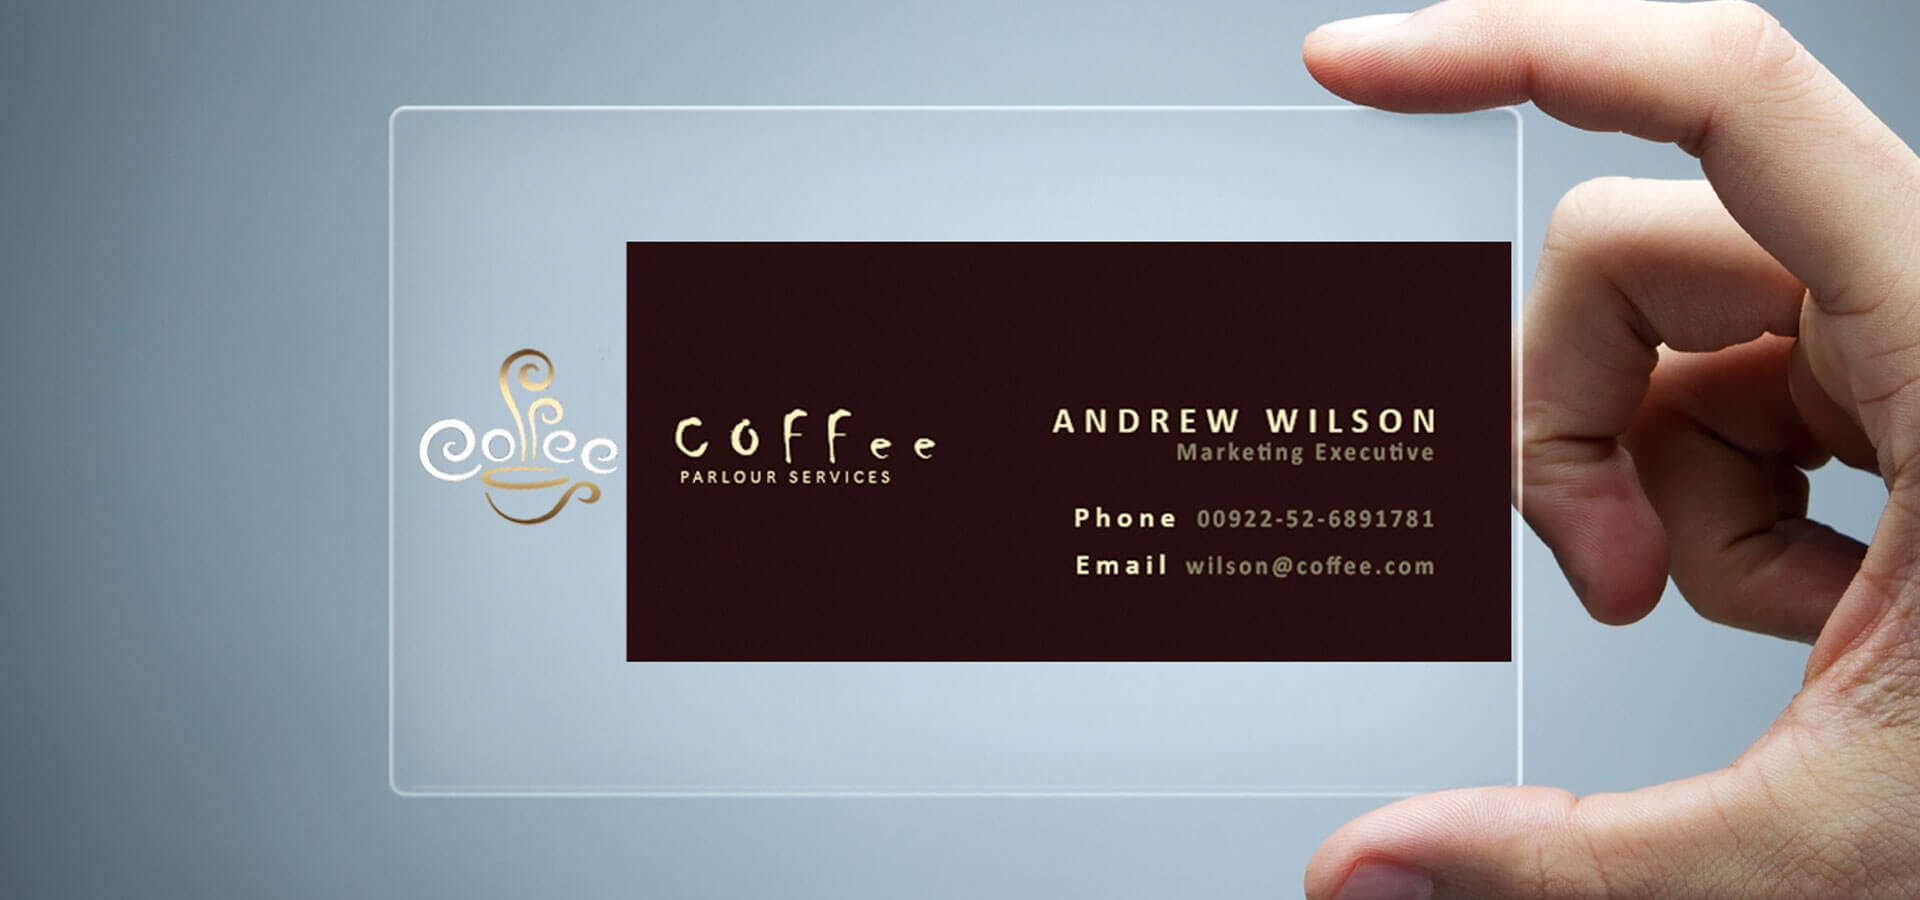 023 Template Ideas Business Card Illustrator Download With Regard To Visiting Card Illustrator Templates Download